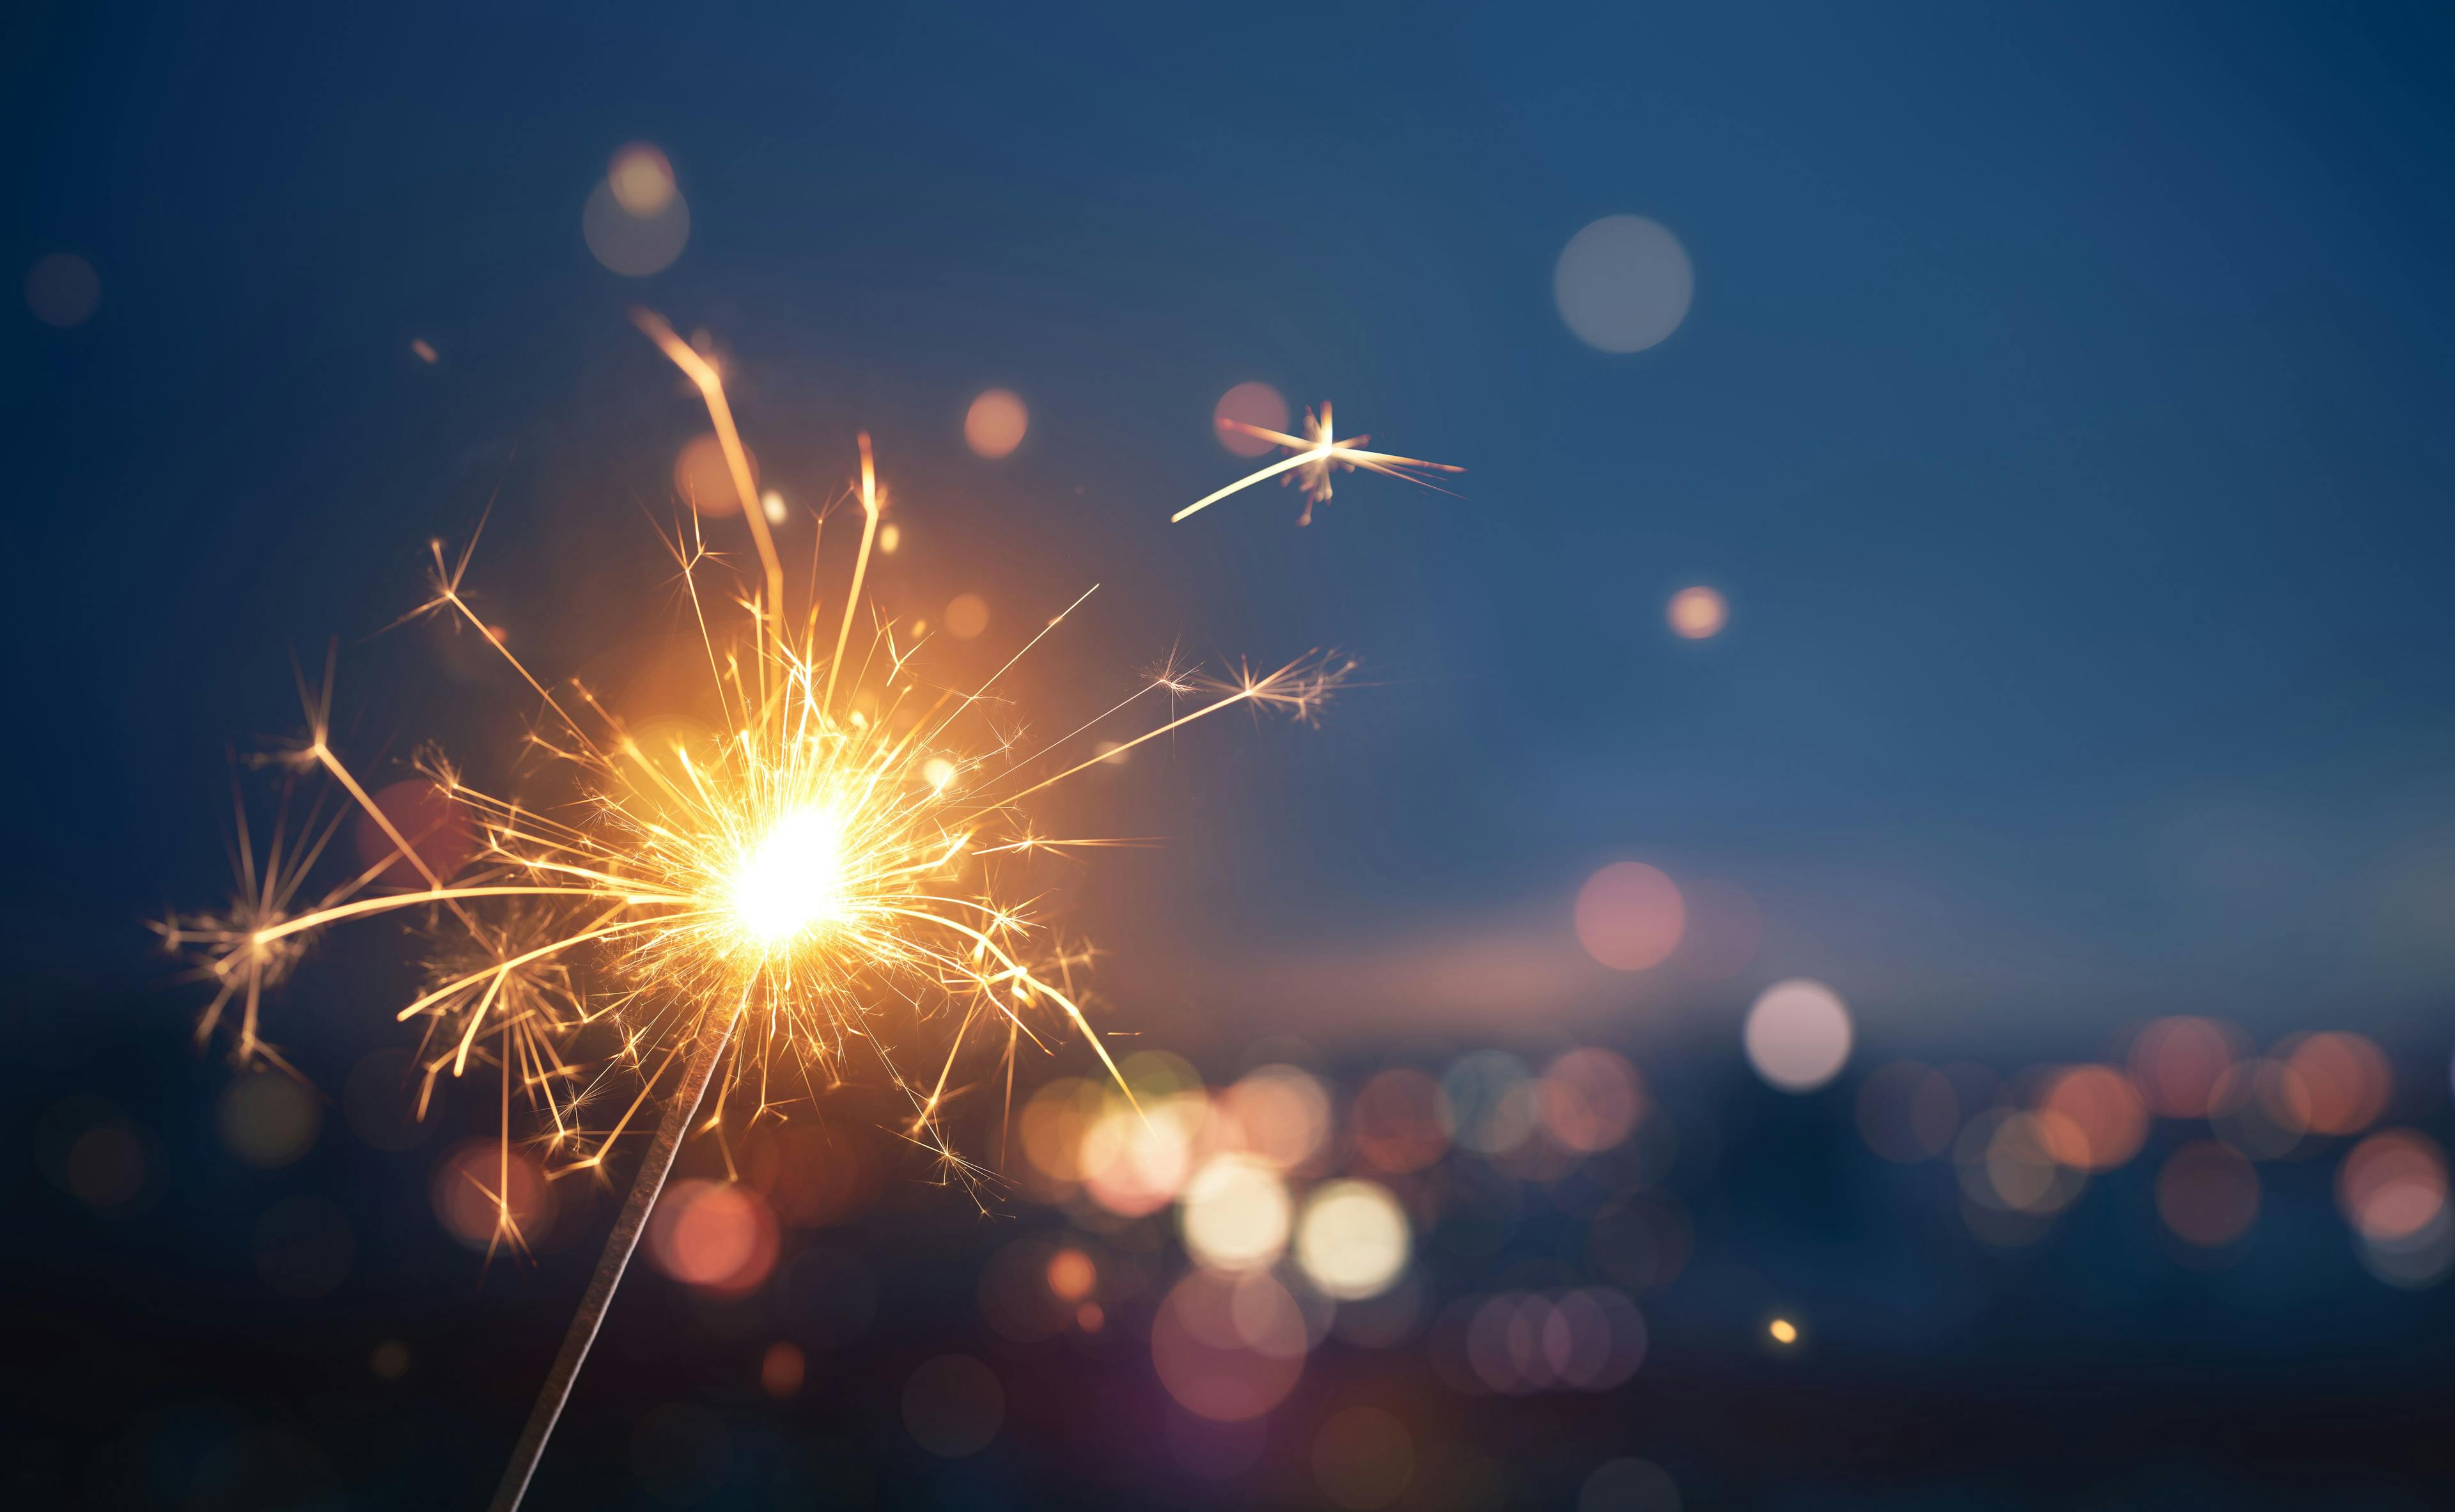 Sparkler with blurred busy city light background | Image credit: phive2015 - stock.adobe.com